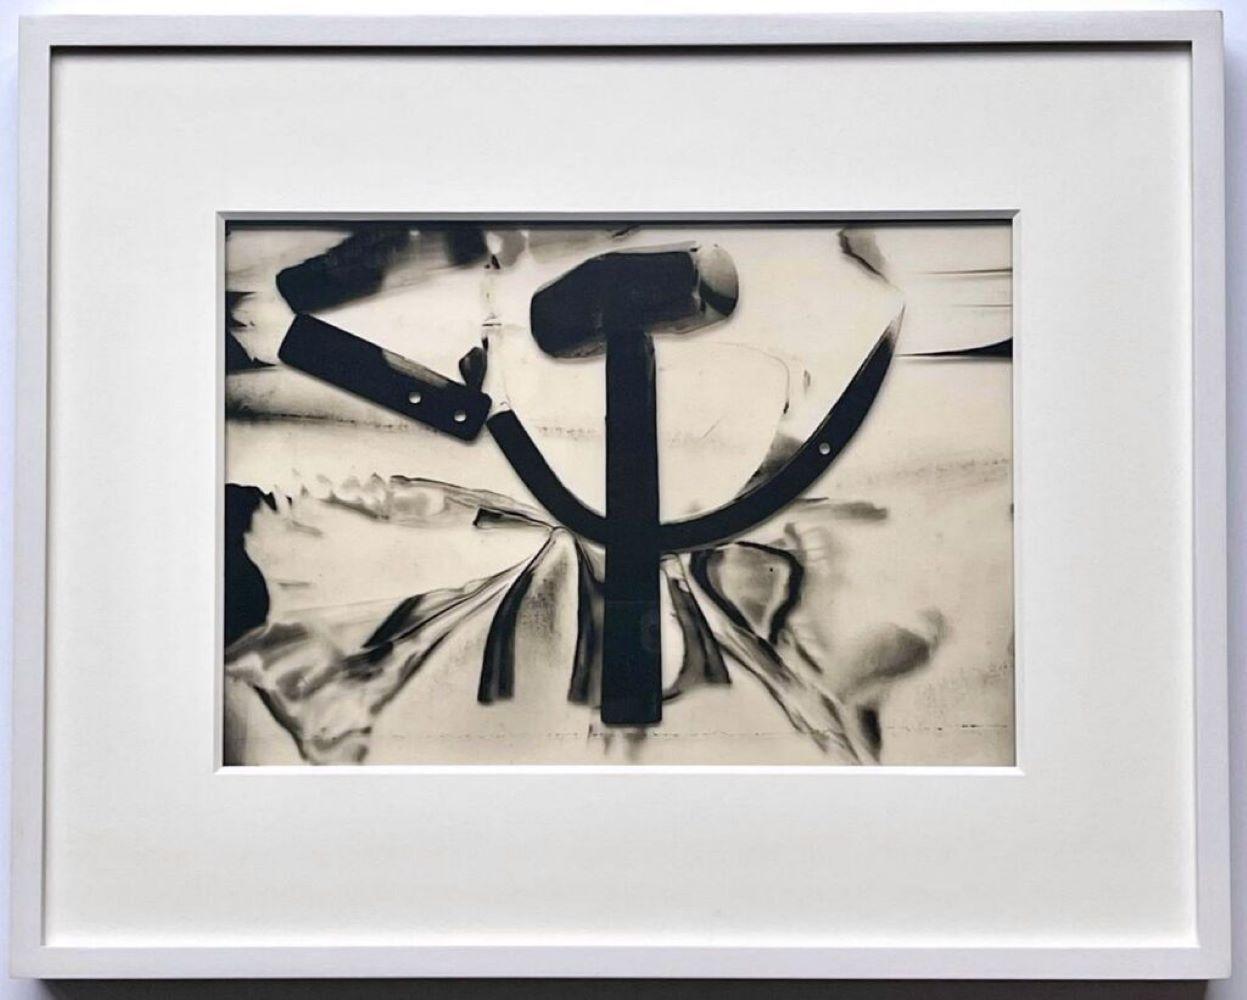 Andy Warhol Still-Life Photograph - Hammer & Sickle, acetate of iconic image, given by Warhol to Chromacomp Inc. 